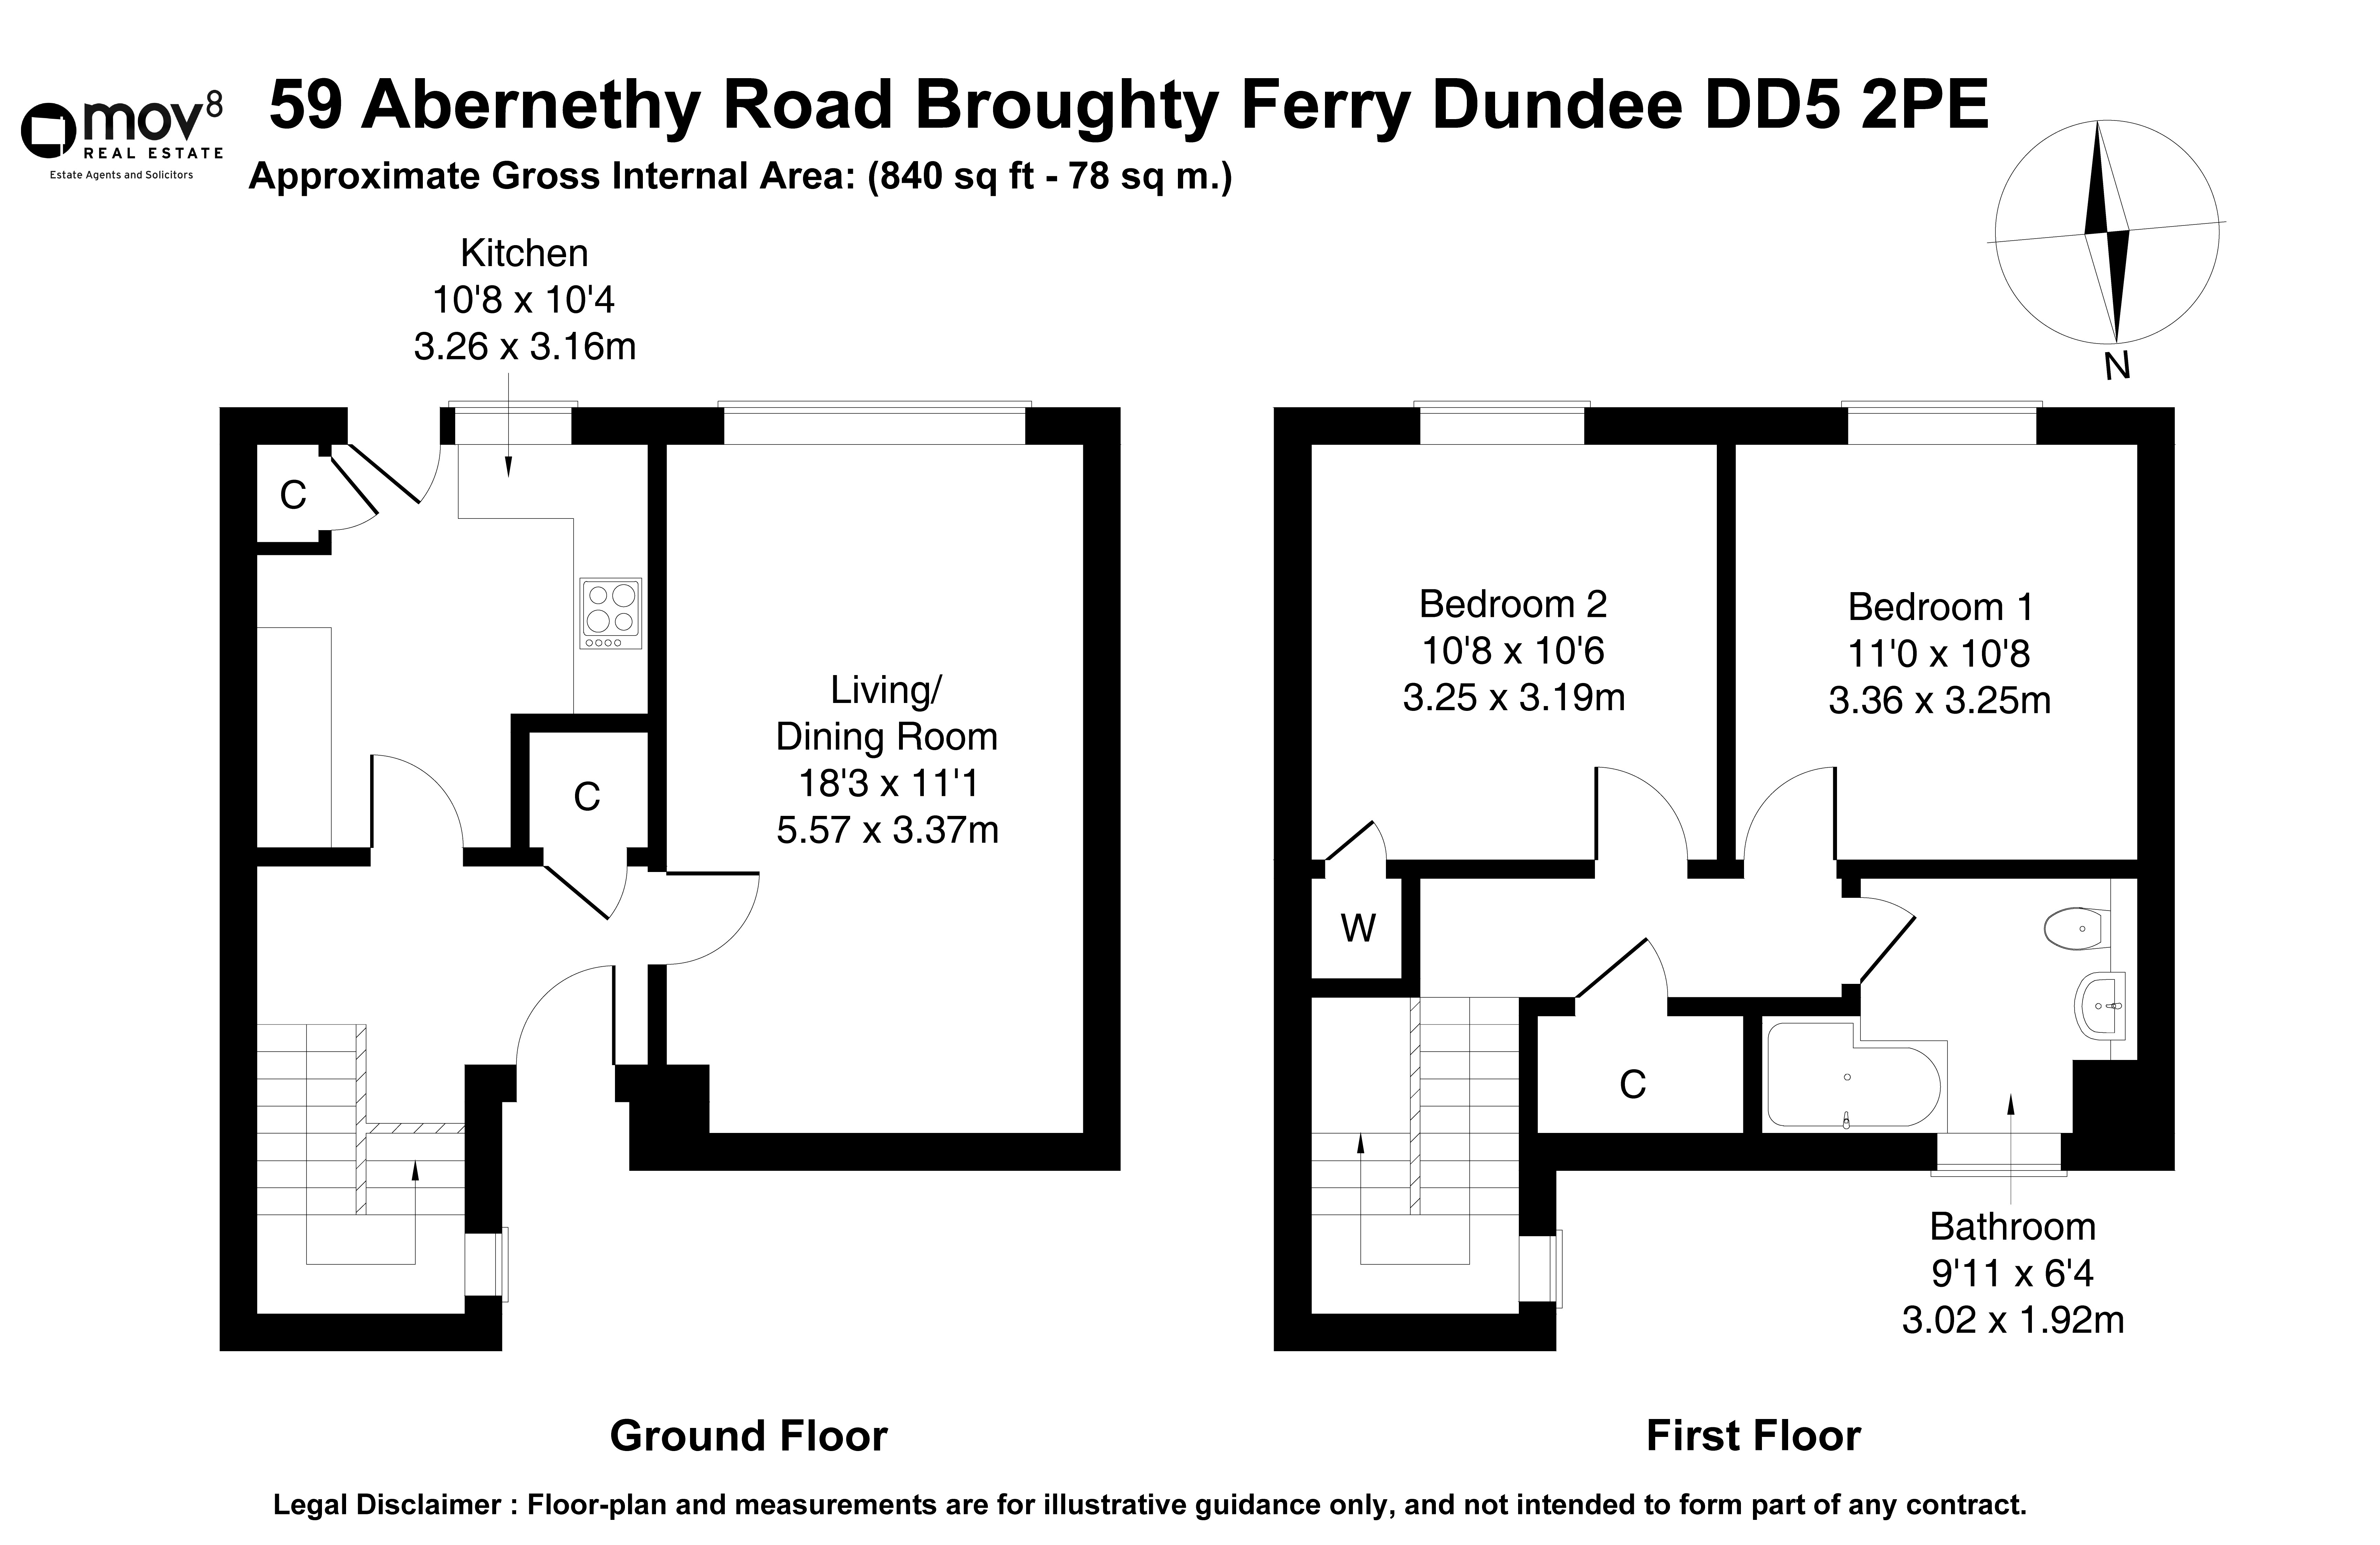 Floorplan 1 of 59 Abernethy Road, Broughty Ferry, Dundee, Angus, DD5 2PE